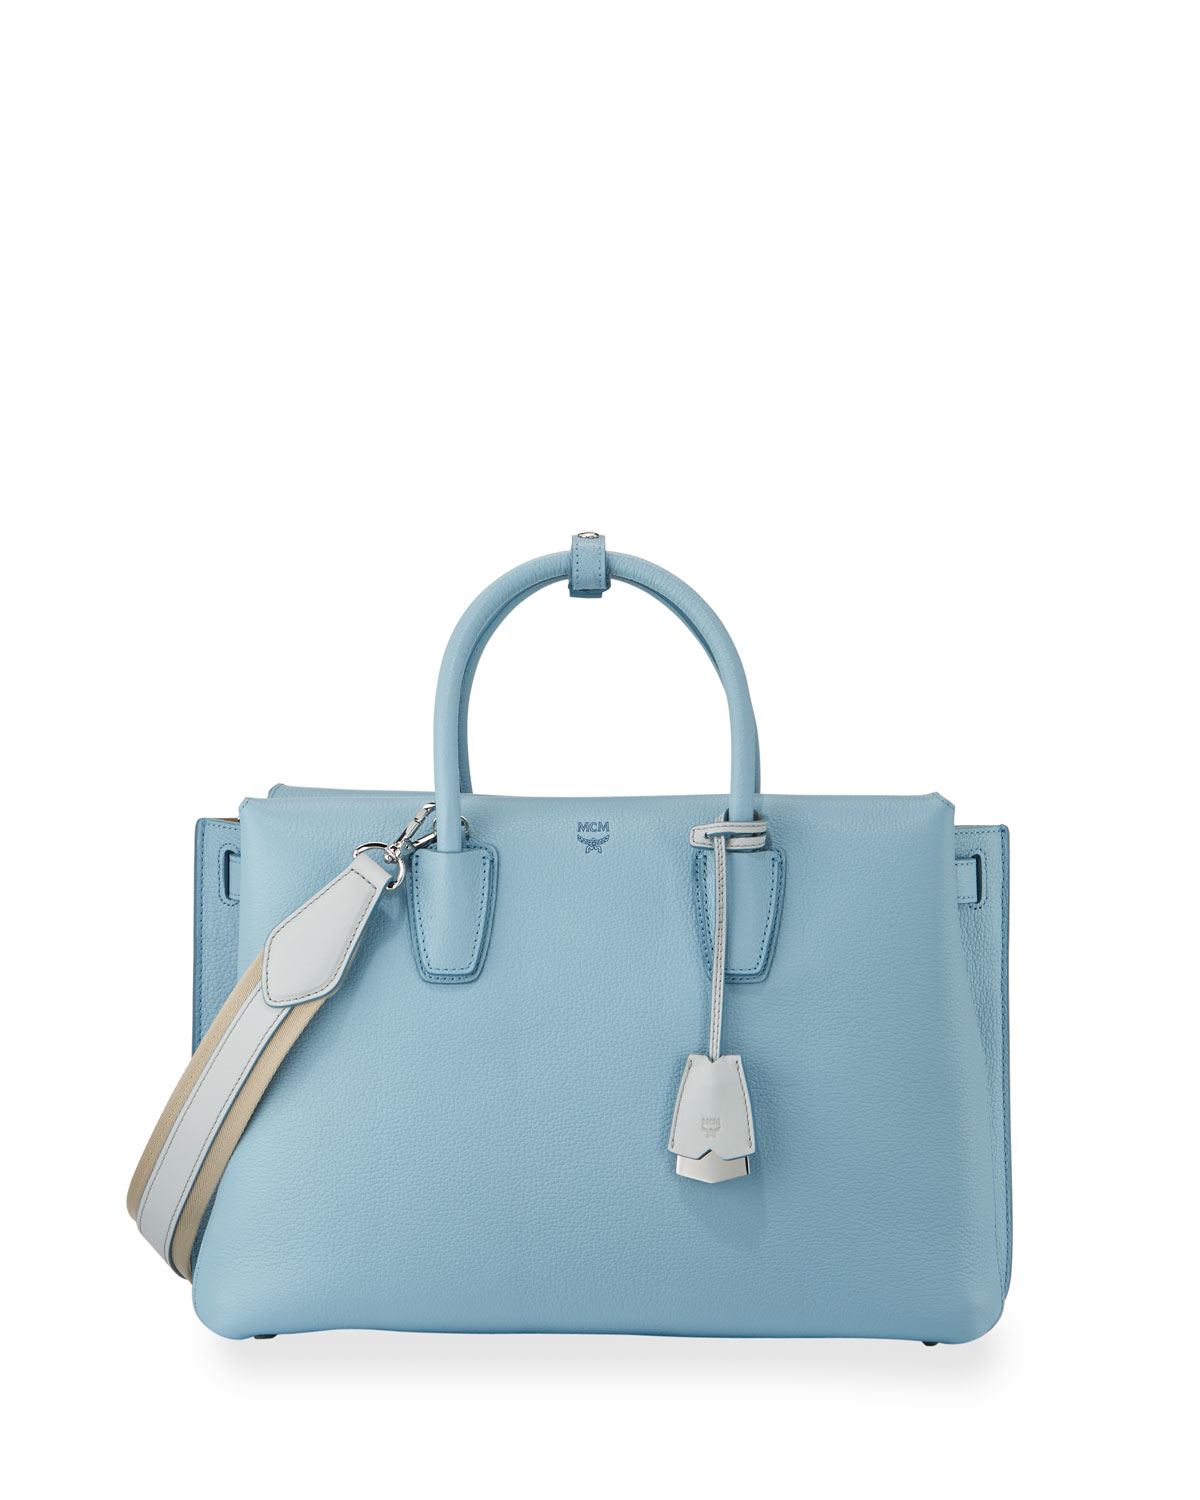 Mcm Milla Large Leather Tote Bag in Blue (SKY BLUE) | Lyst